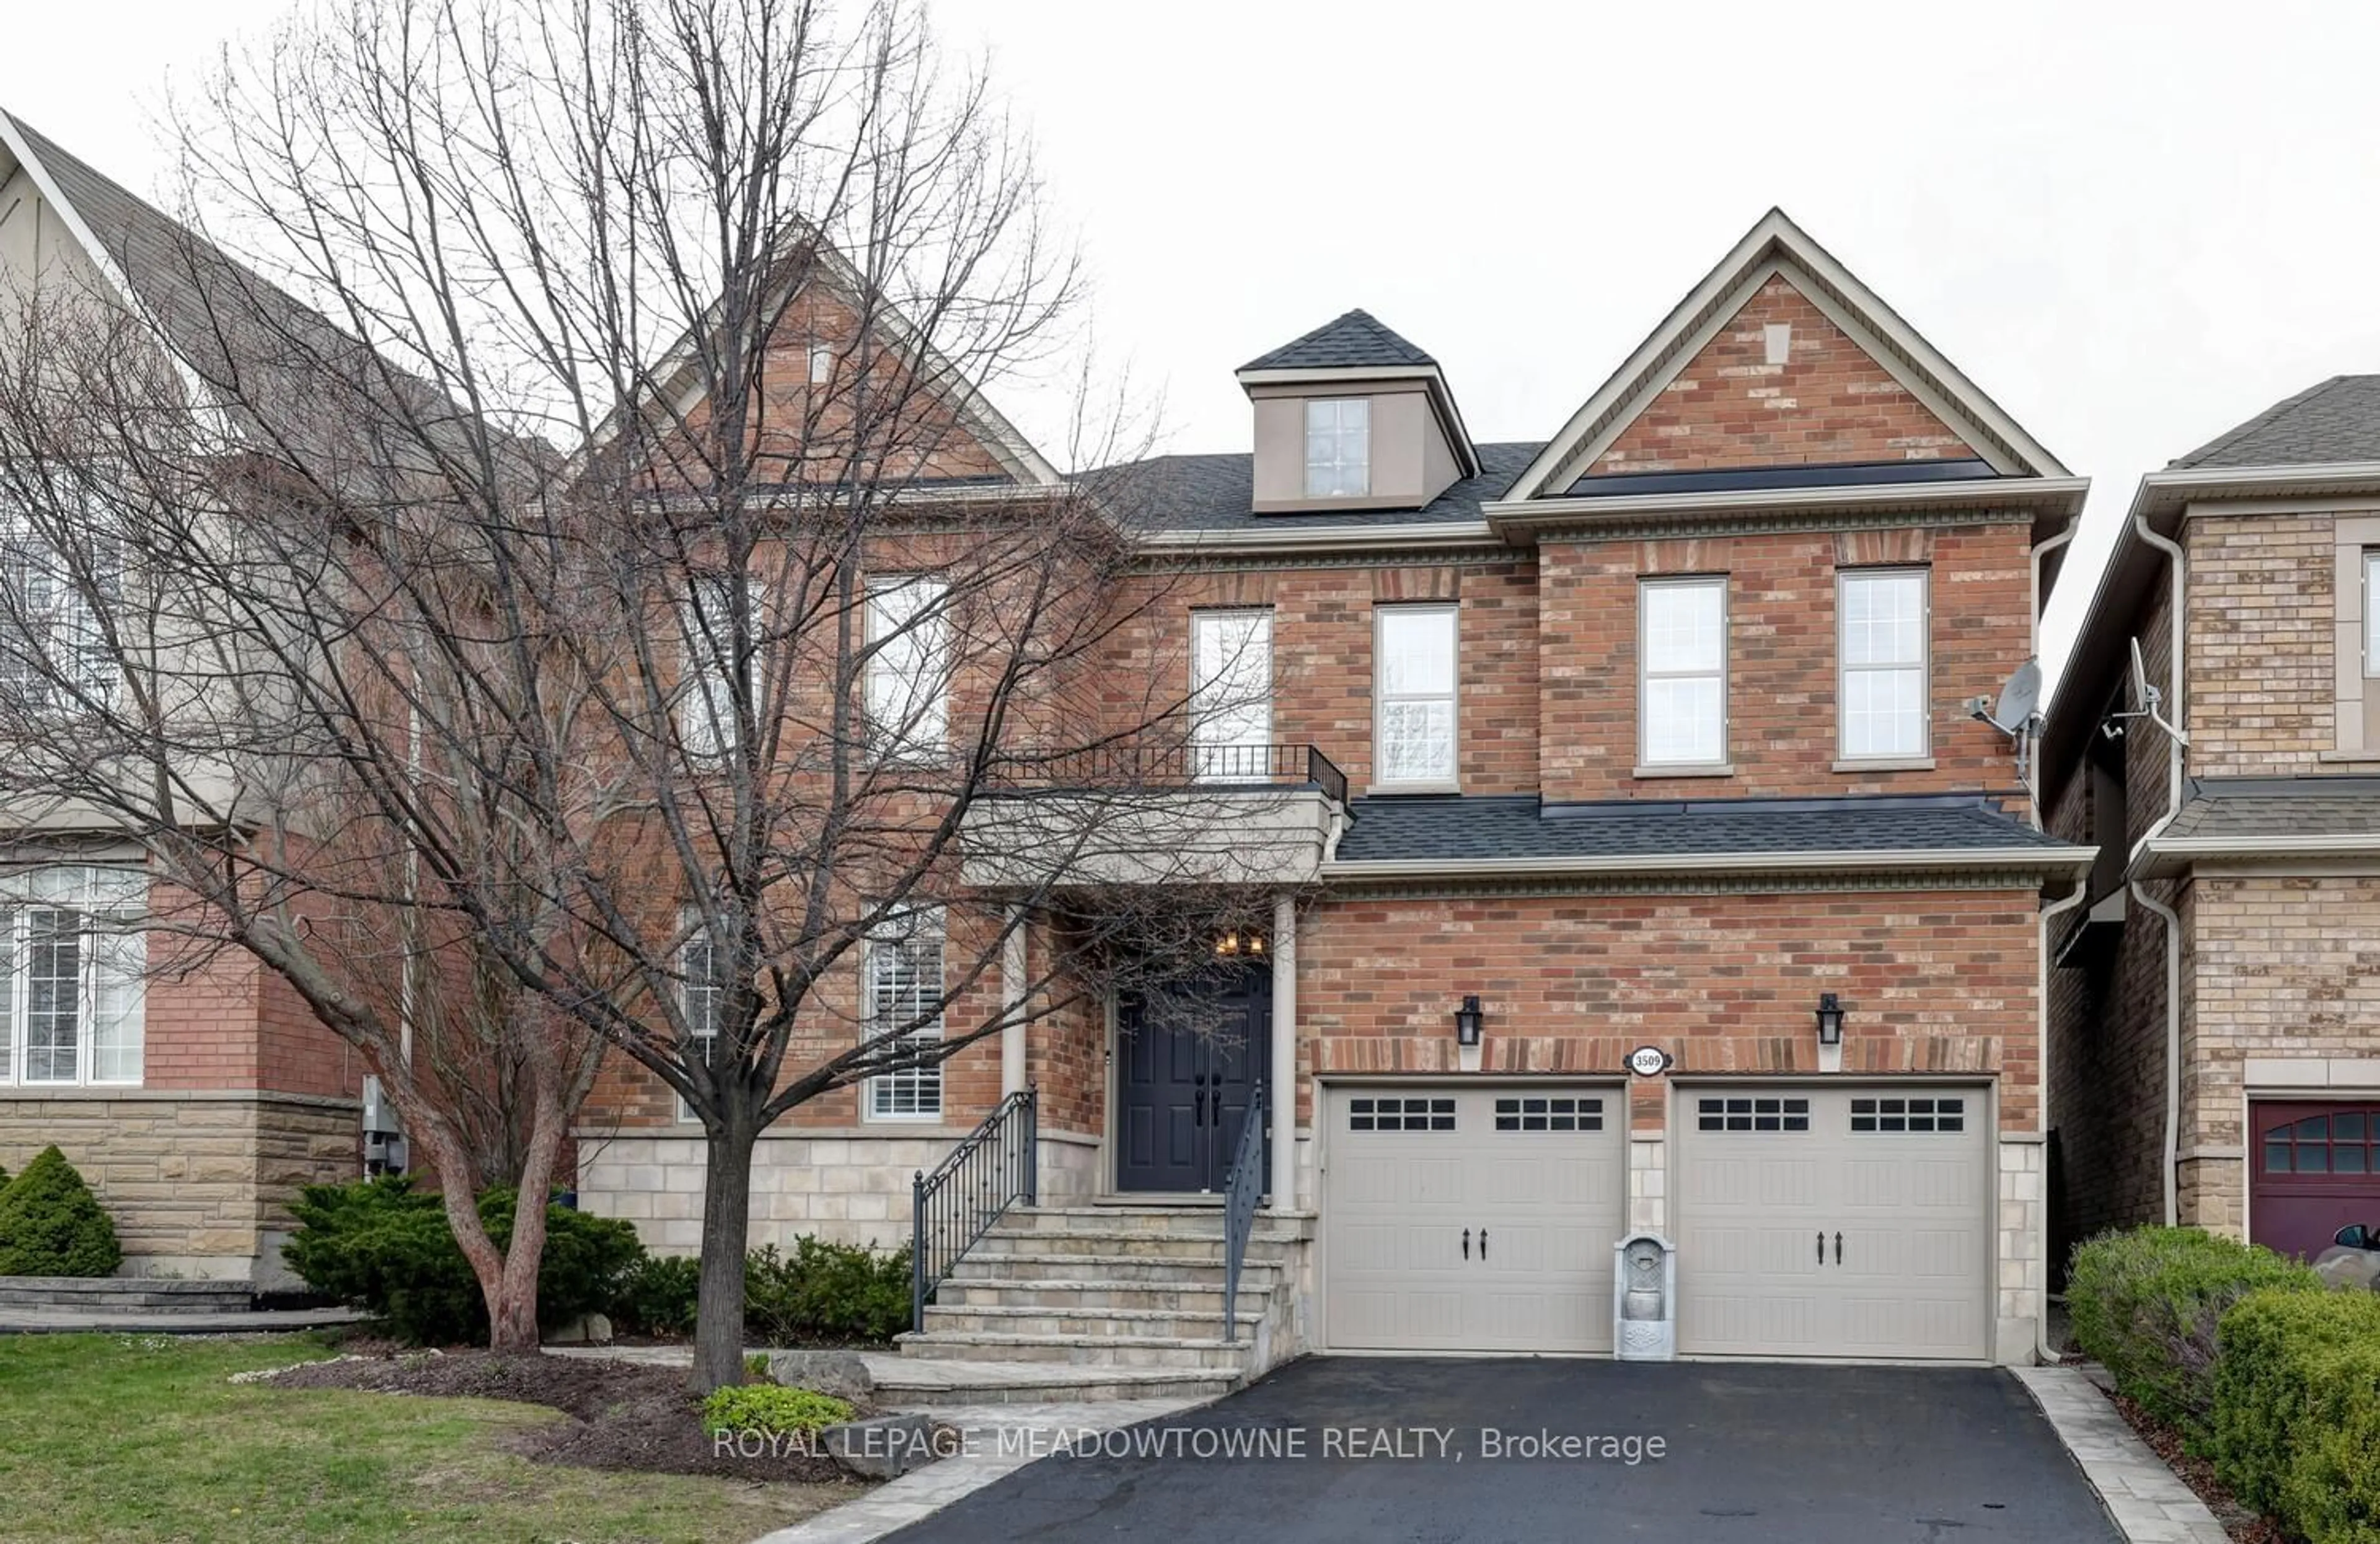 Home with brick exterior material for 3509 Stonecutter Cres, Mississauga Ontario L5M 7N7